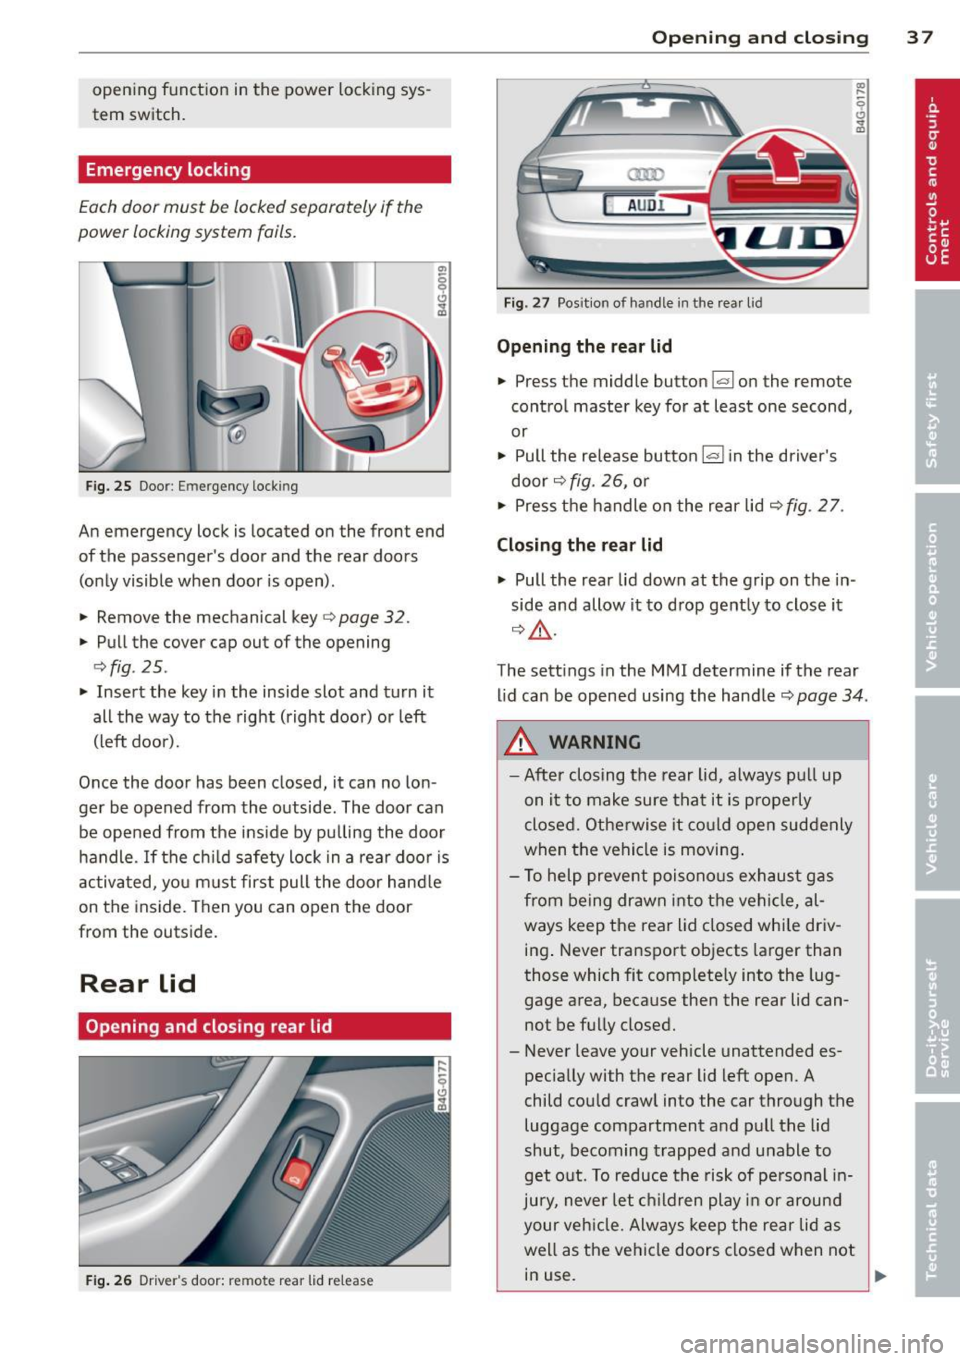 AUDI S6 2013 Owners Guide opening  function in the  power  locking sys­
tem  switch. 
Emergency  locking 
Each door  must  be locked separately  if the 
power  locking  system  fails. 
F ig. 25 Door: Emergency  locking 
An em